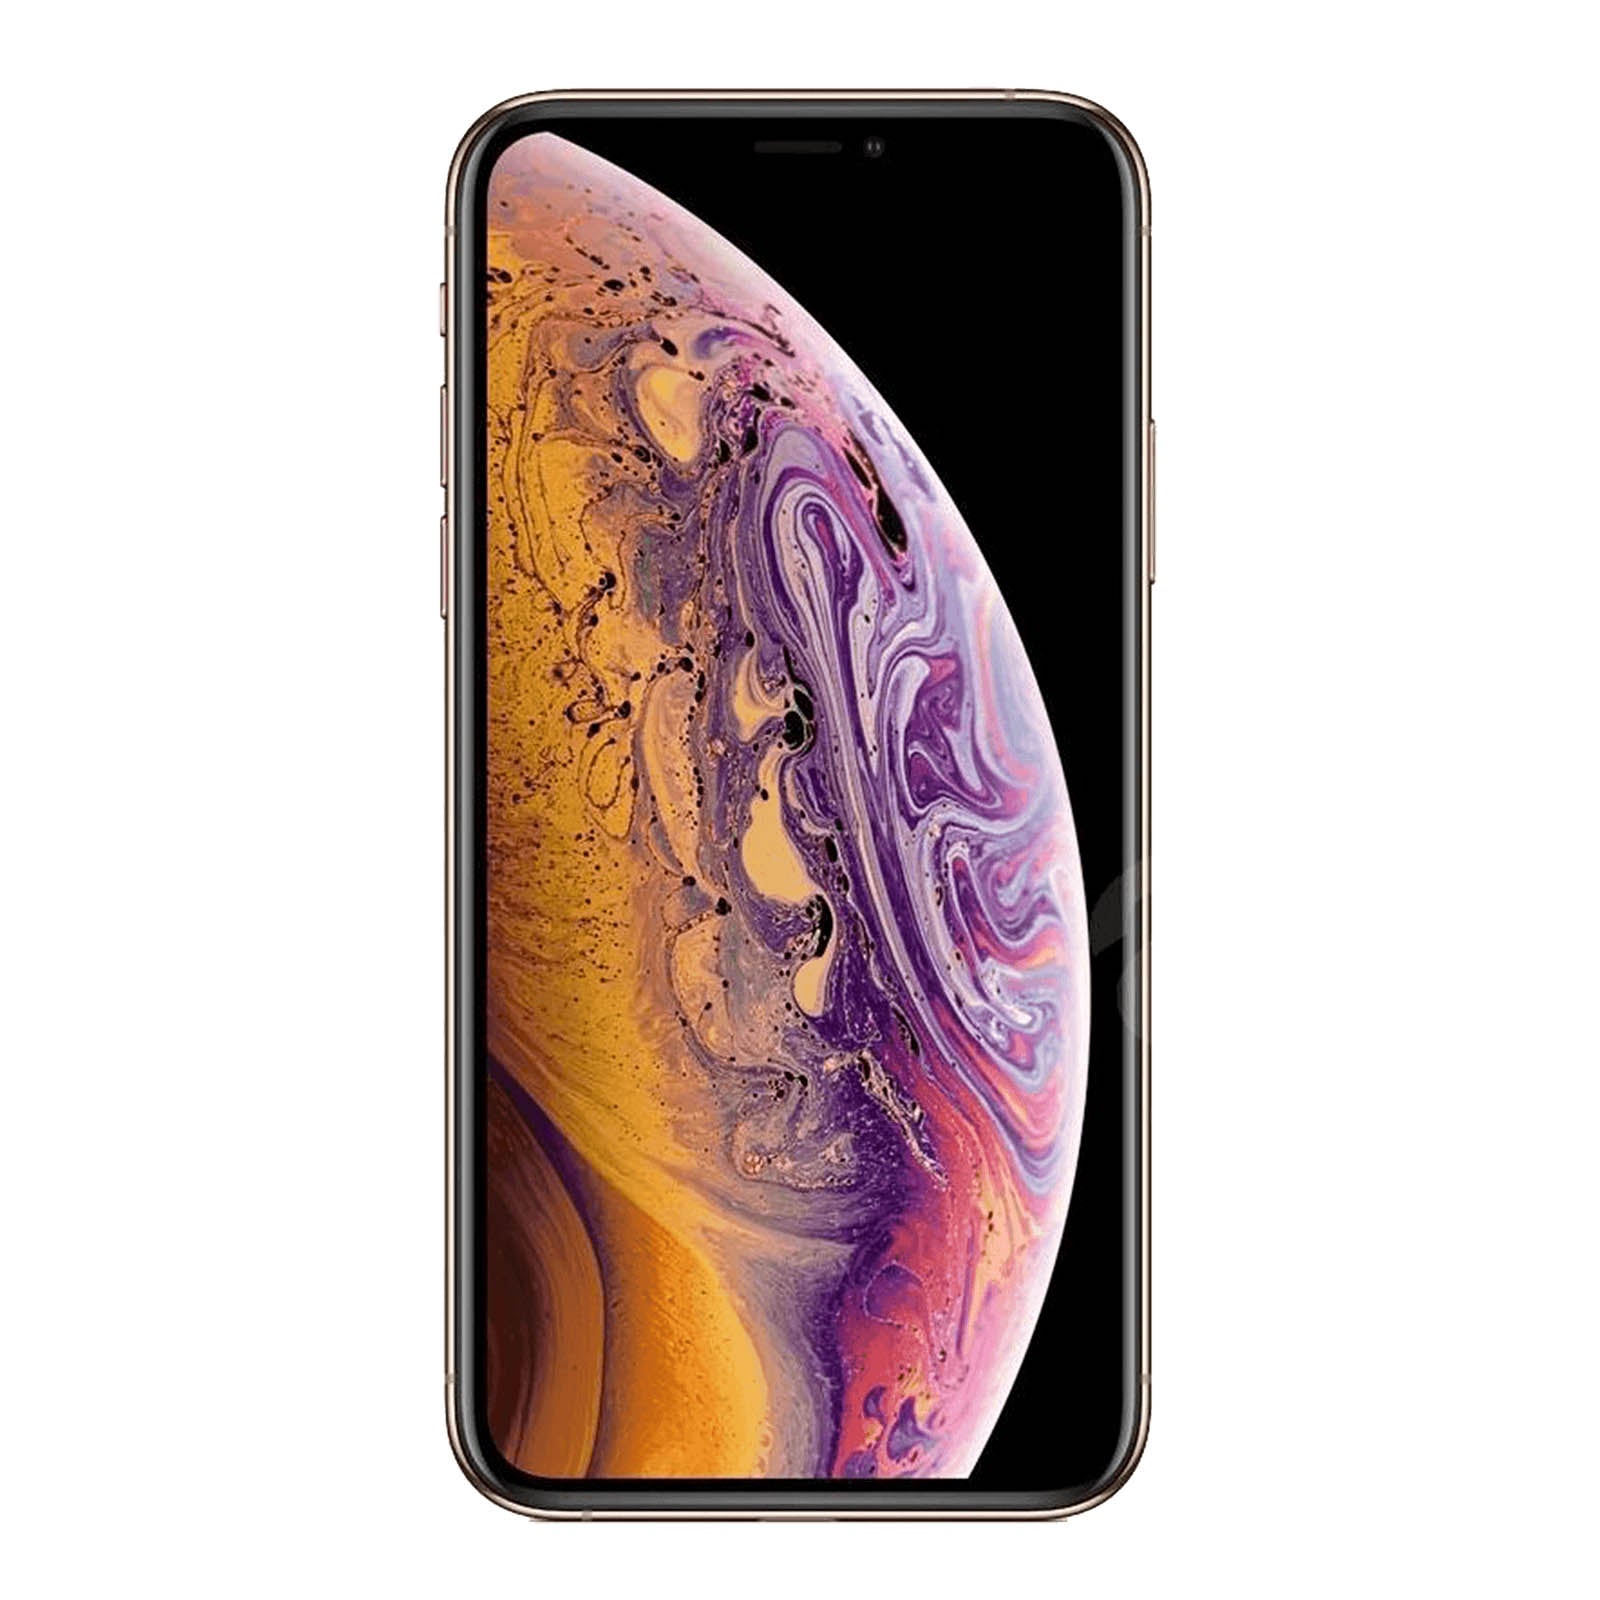 Apple iPhone XS Max 64GB Gold Very Good - T-Mobile